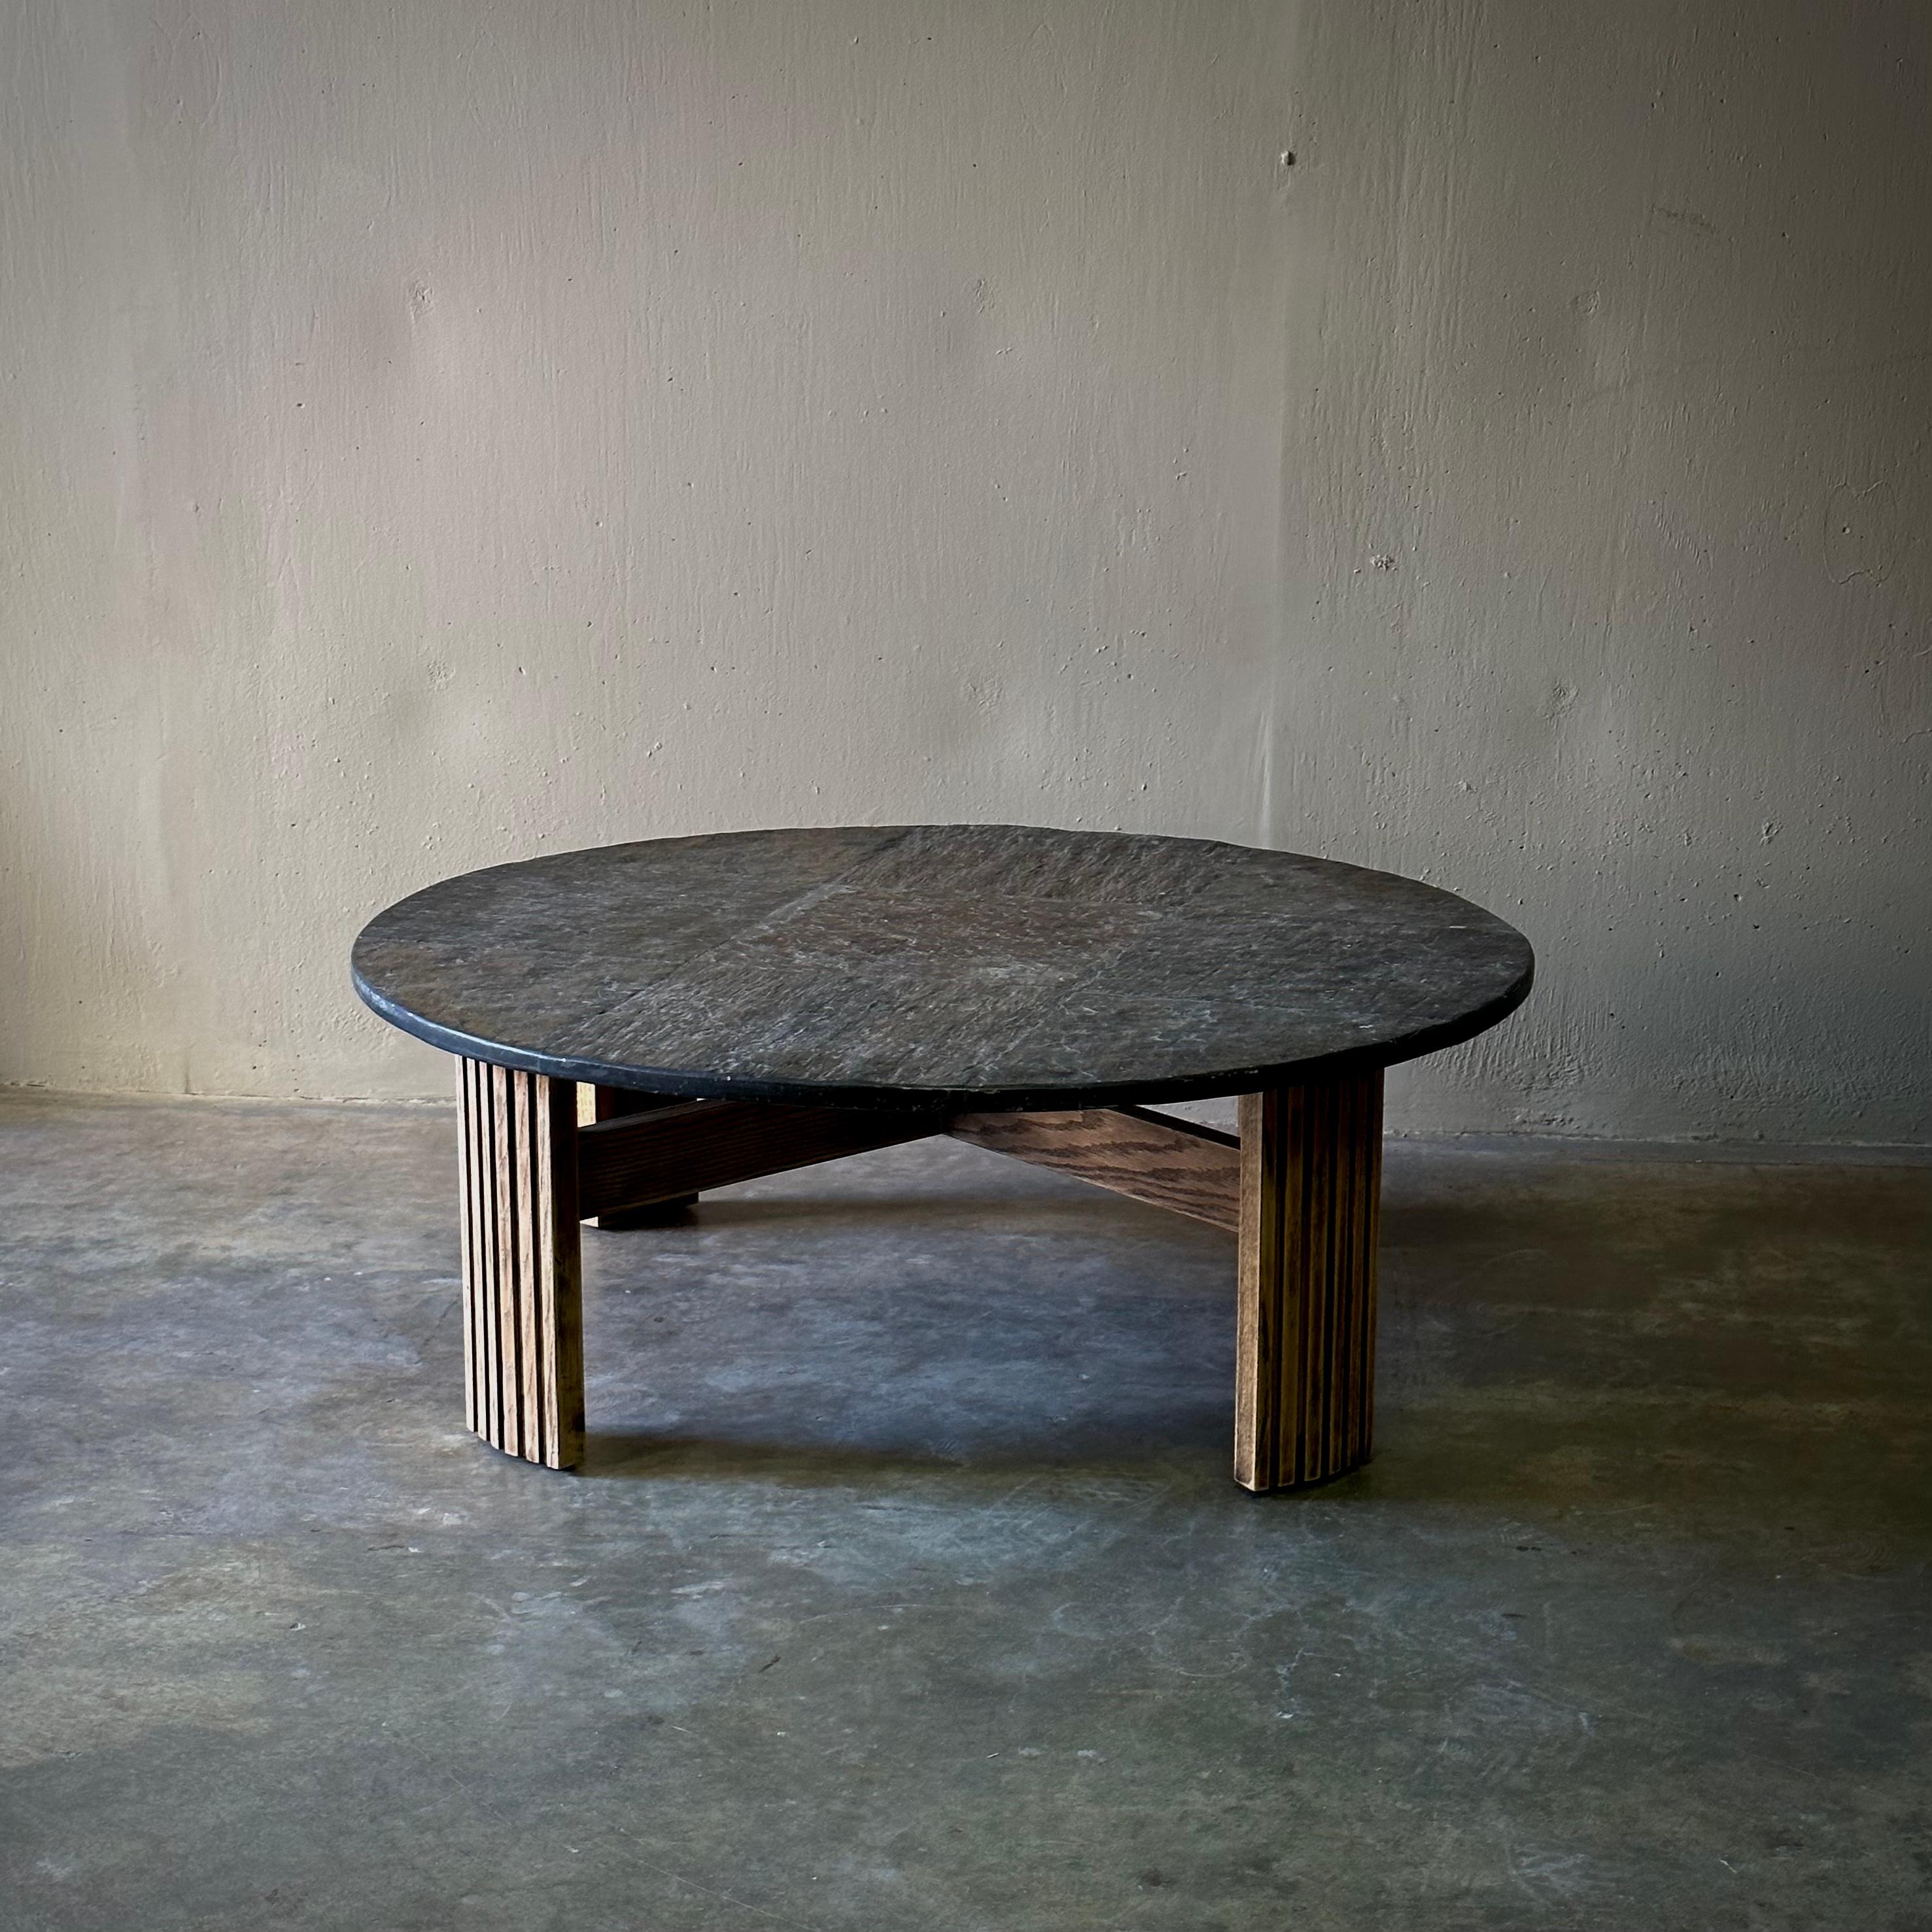 Dutch 1970s slate coffee table with circular top and striated modernist wood legs. Cool and earthy with a sleek midcentury silhouette. Would work well in both indoor and outdoor spaces alike.

Netherlands, circa 1970.

Dimensions: 41.3W x 41.3D x